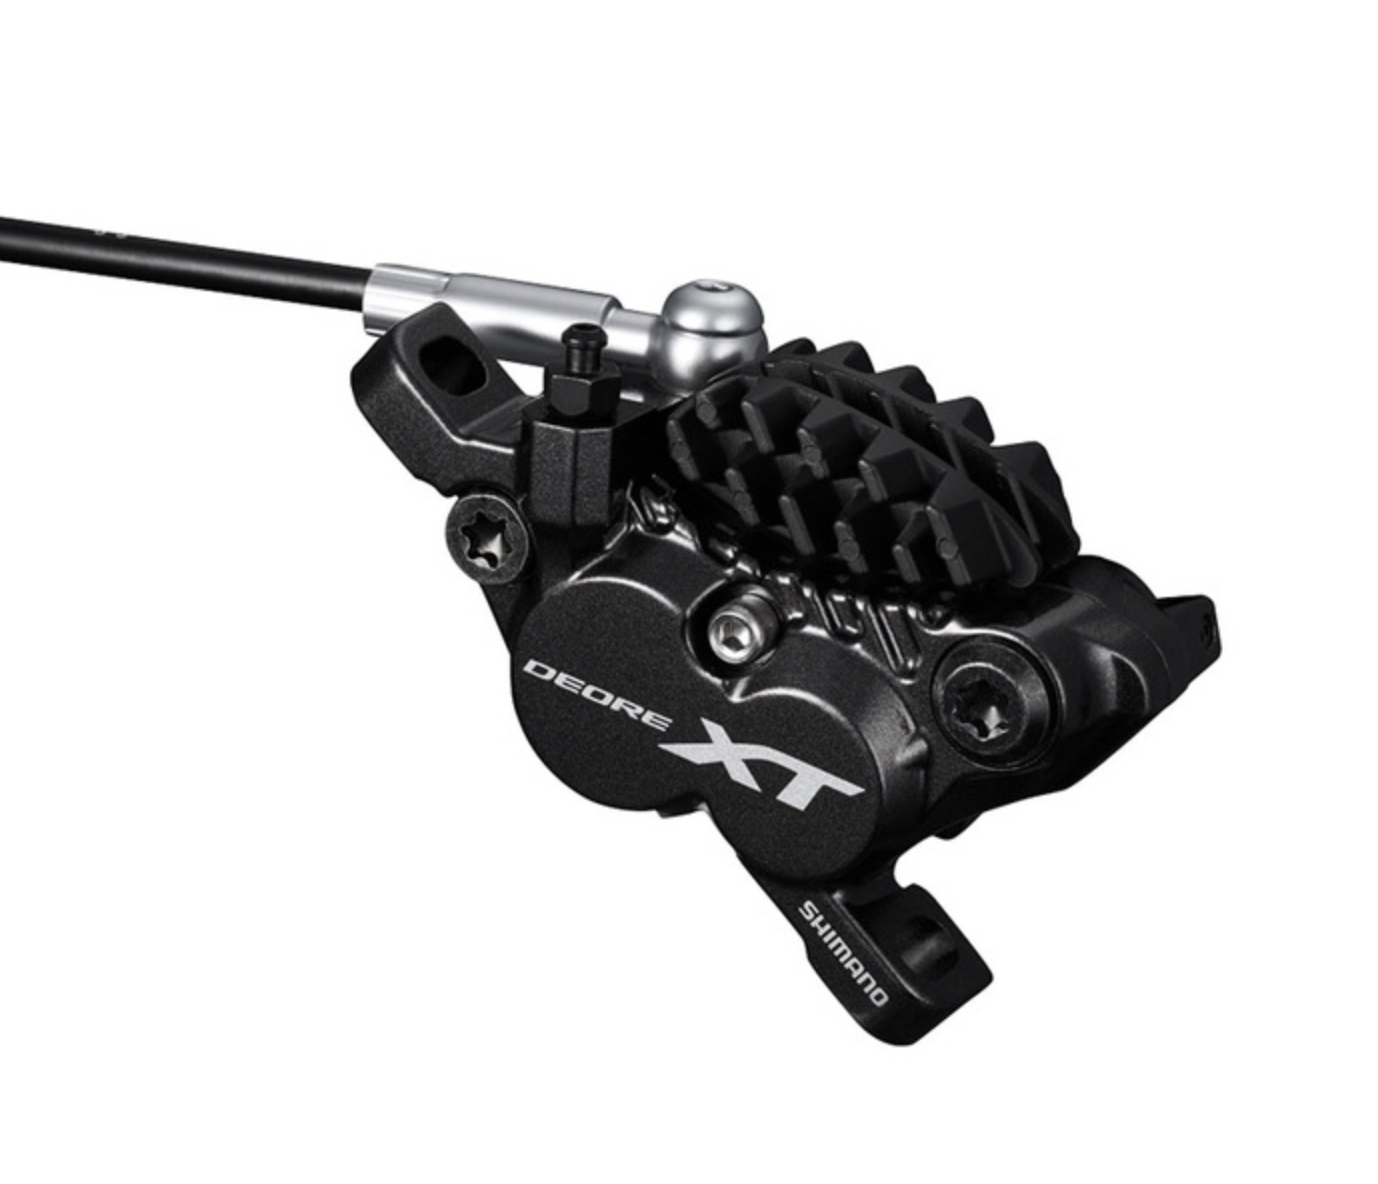 SHIMANO - HYDRAULIC DISC BRAKE, BR-M8020, DEORE XT, FRONT OR REAR FOR POST MOUNT, W/O ADAPTER, W/H03C METAL PAD(W/FIN)